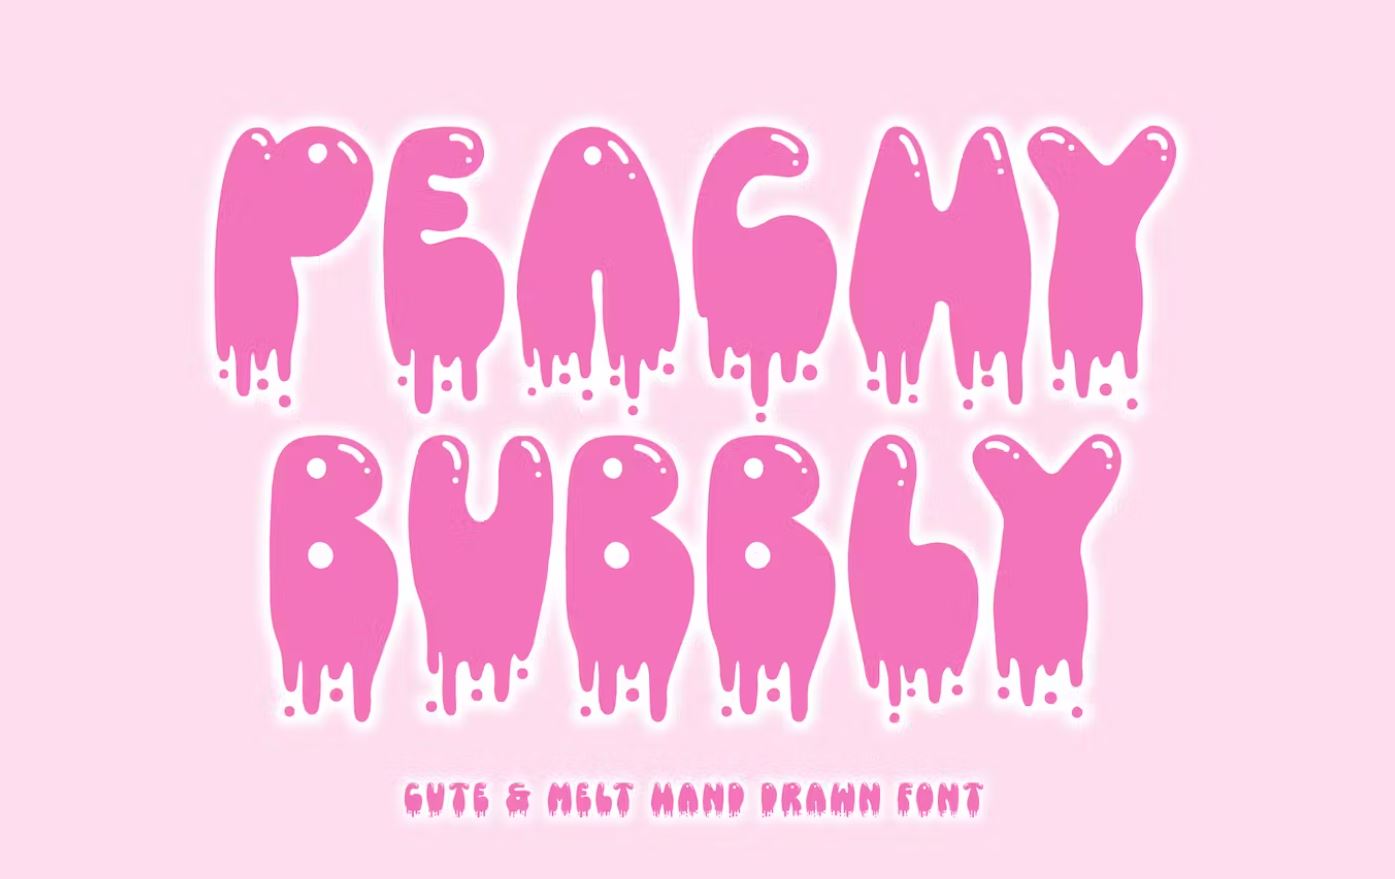 Cute meting style bubbly font